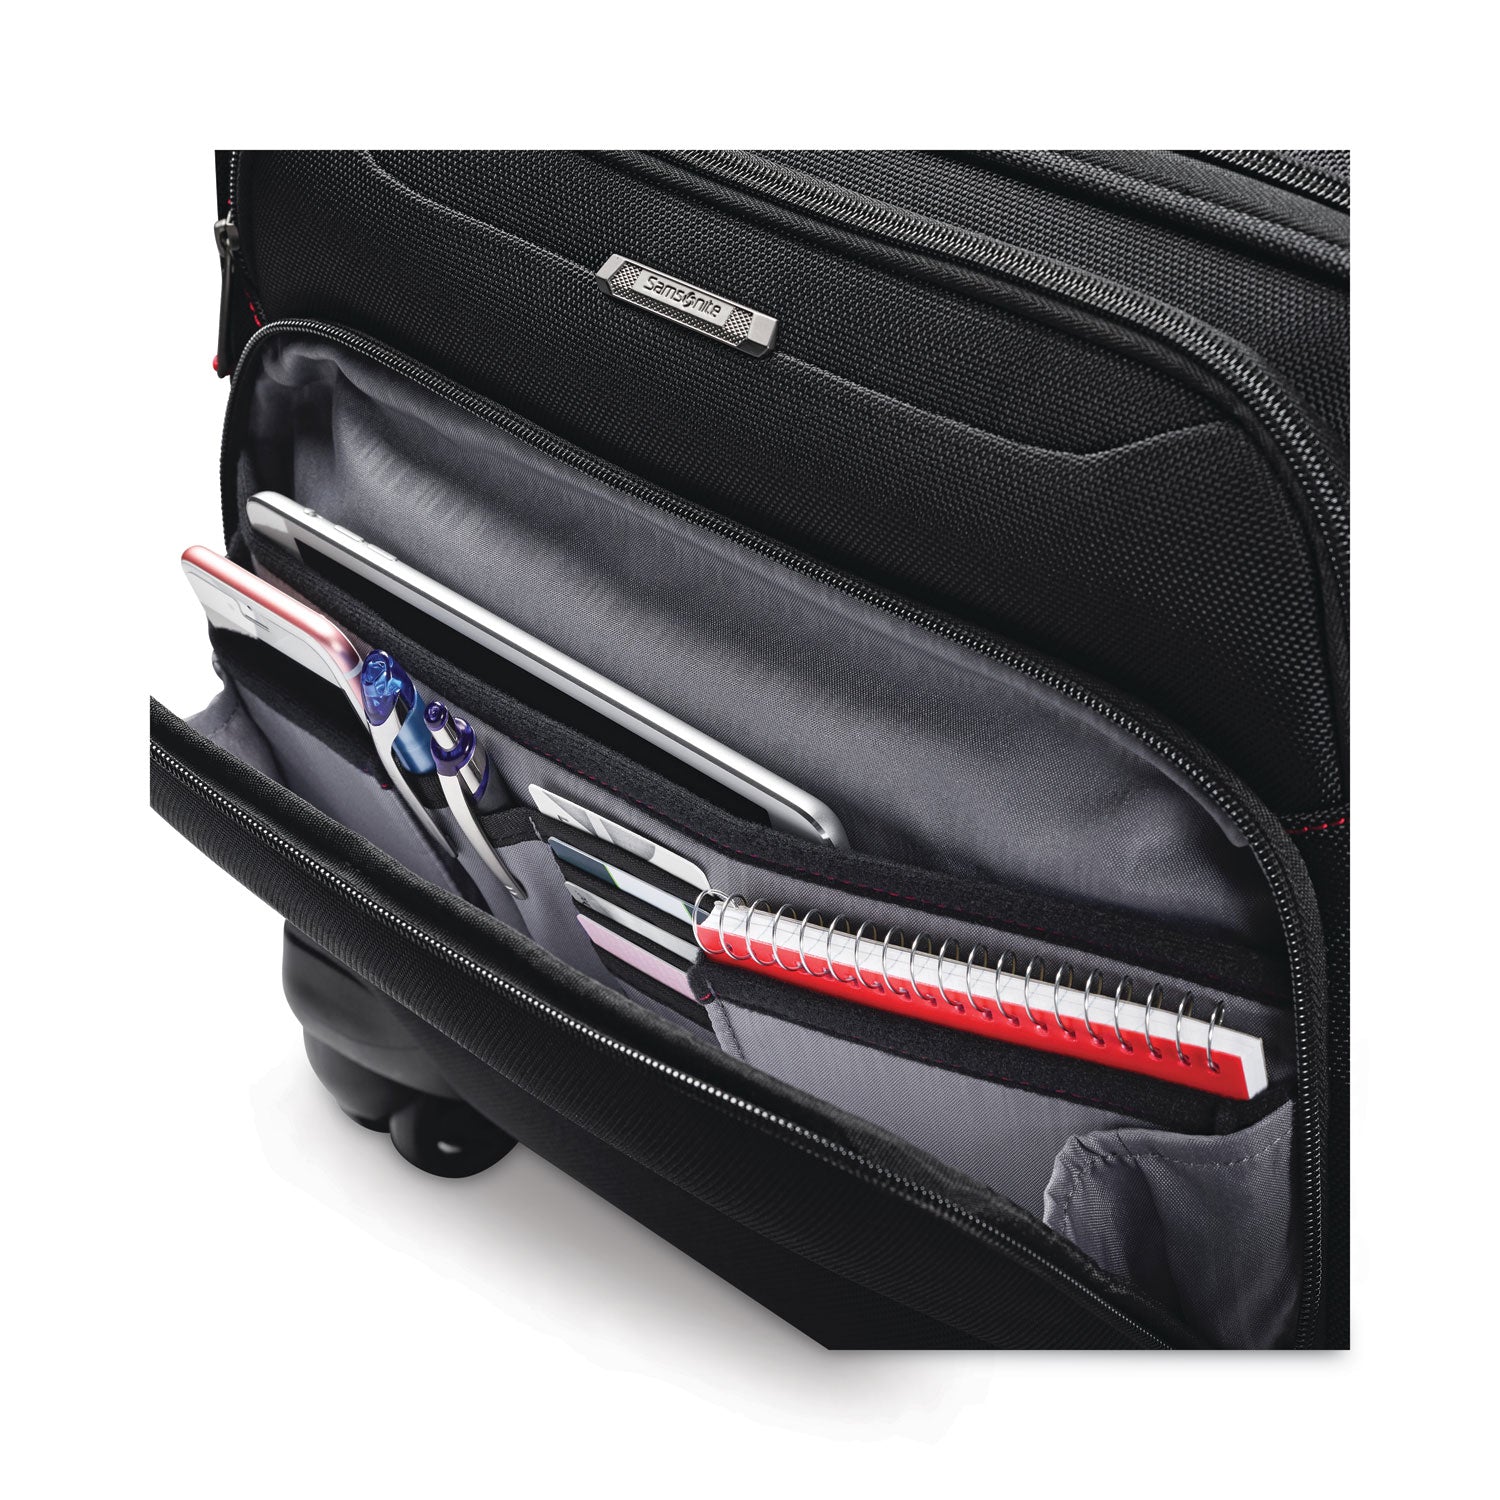 xenon-3-spinner-mobile-office-fits-devices-up-to-156-ballistic-polyester-1325-x-725-x-1625-black_sml894381041 - 6